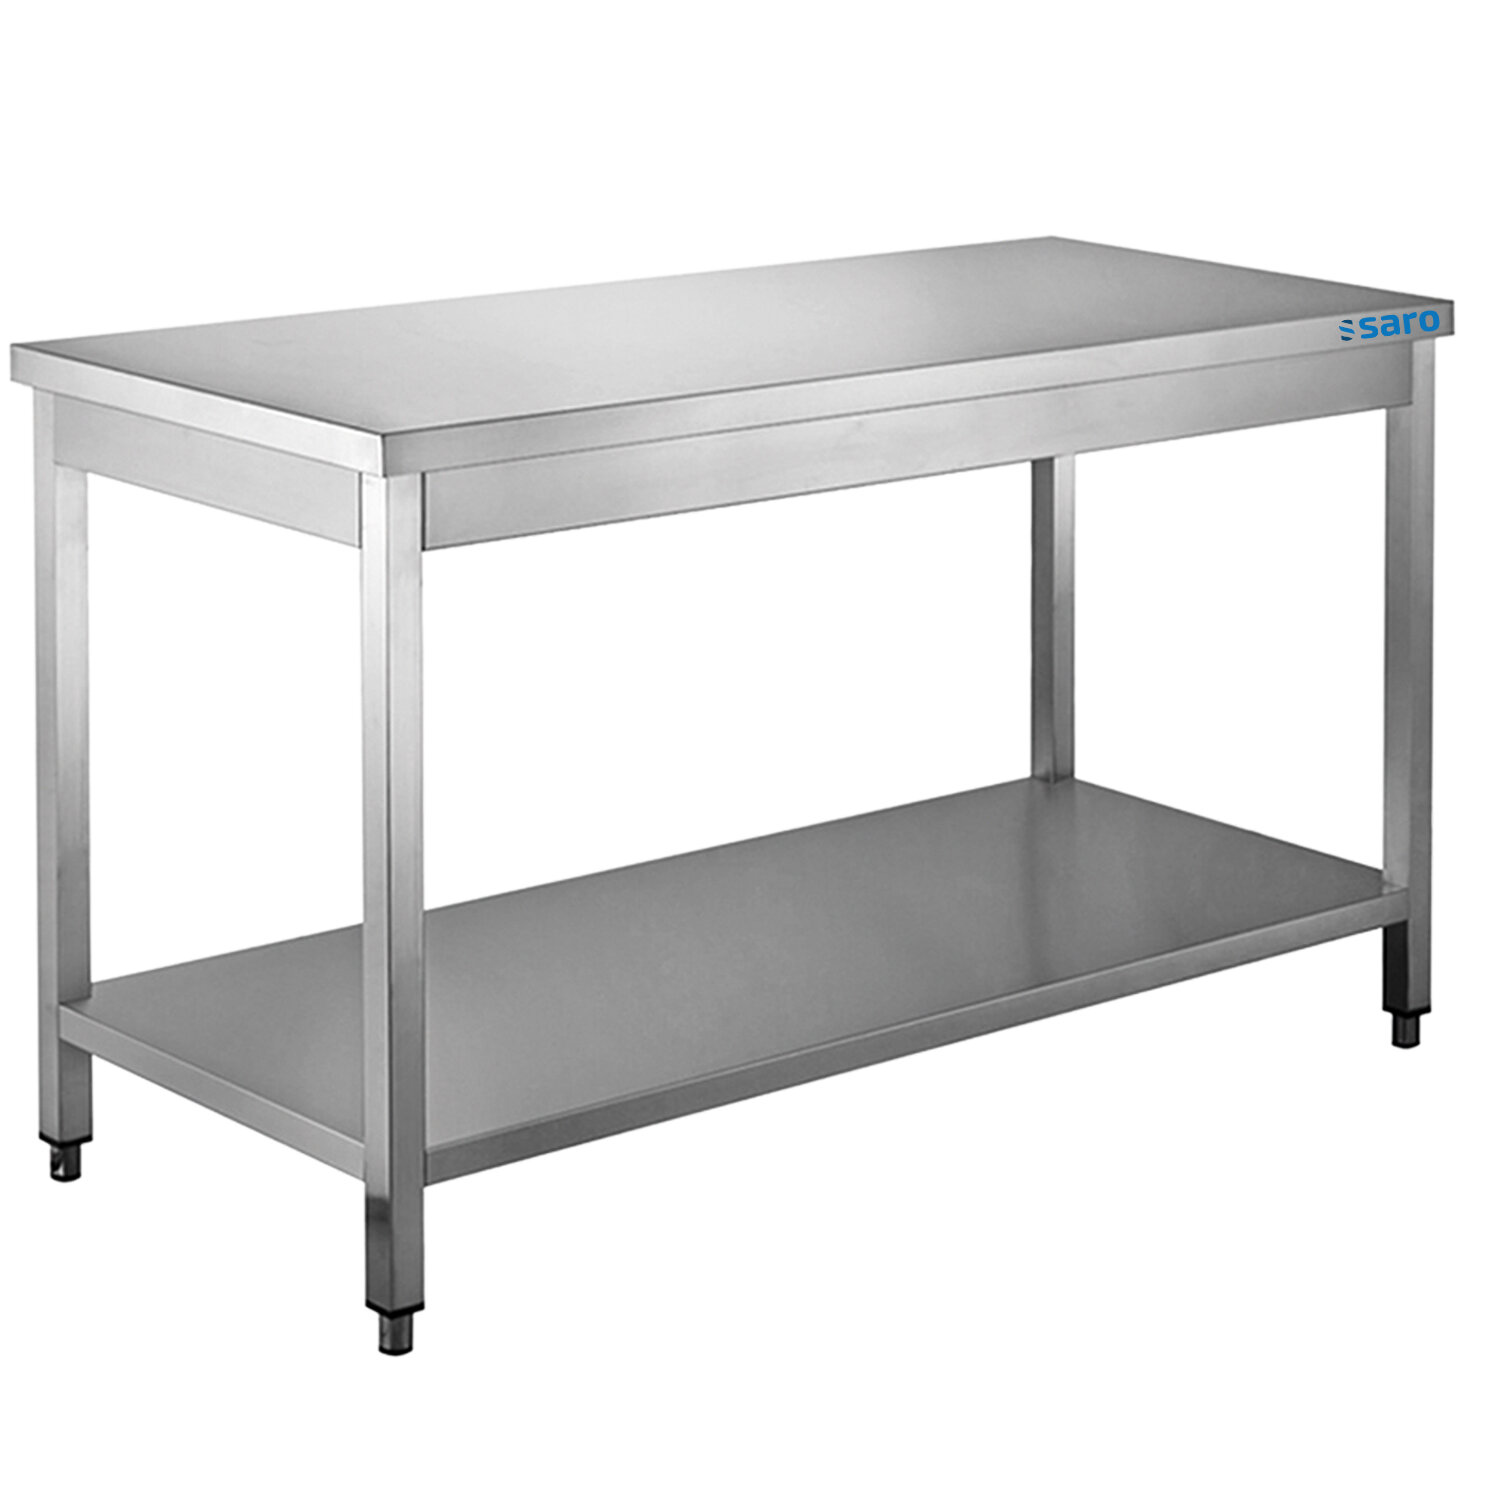 SARO Stainless steel table with under shelf - 700 mm depth, 2000mm